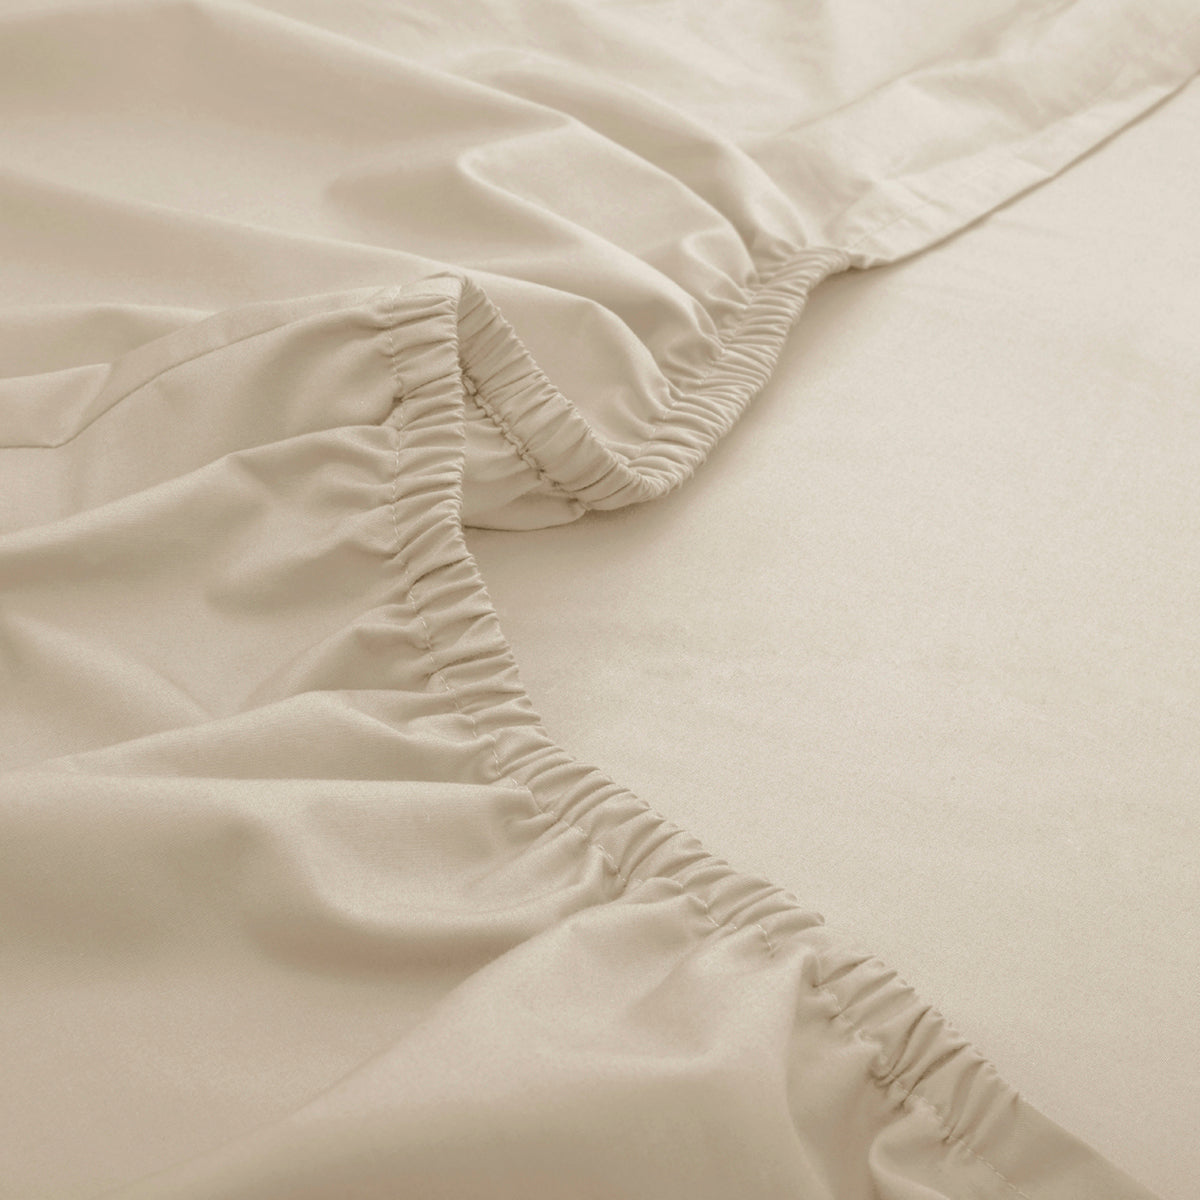 Slumber Plain Easy Care Percale 100% Cotton Ecru Fitted Sheet